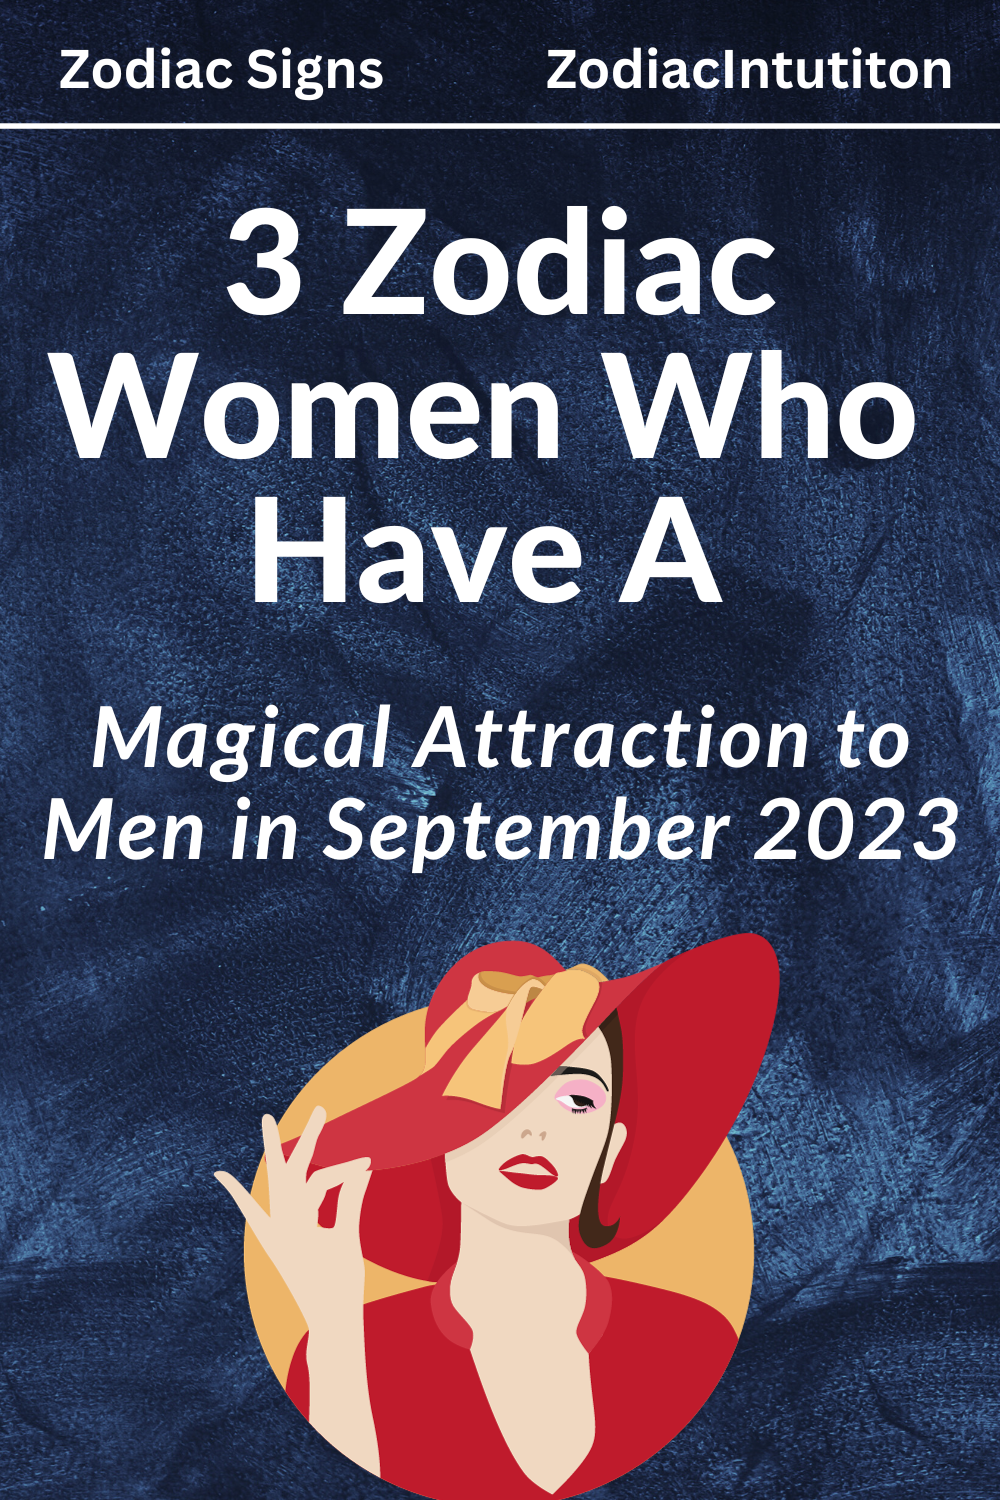 3 Zodiac Women Who Have a Magical Attraction to Men in September 2023